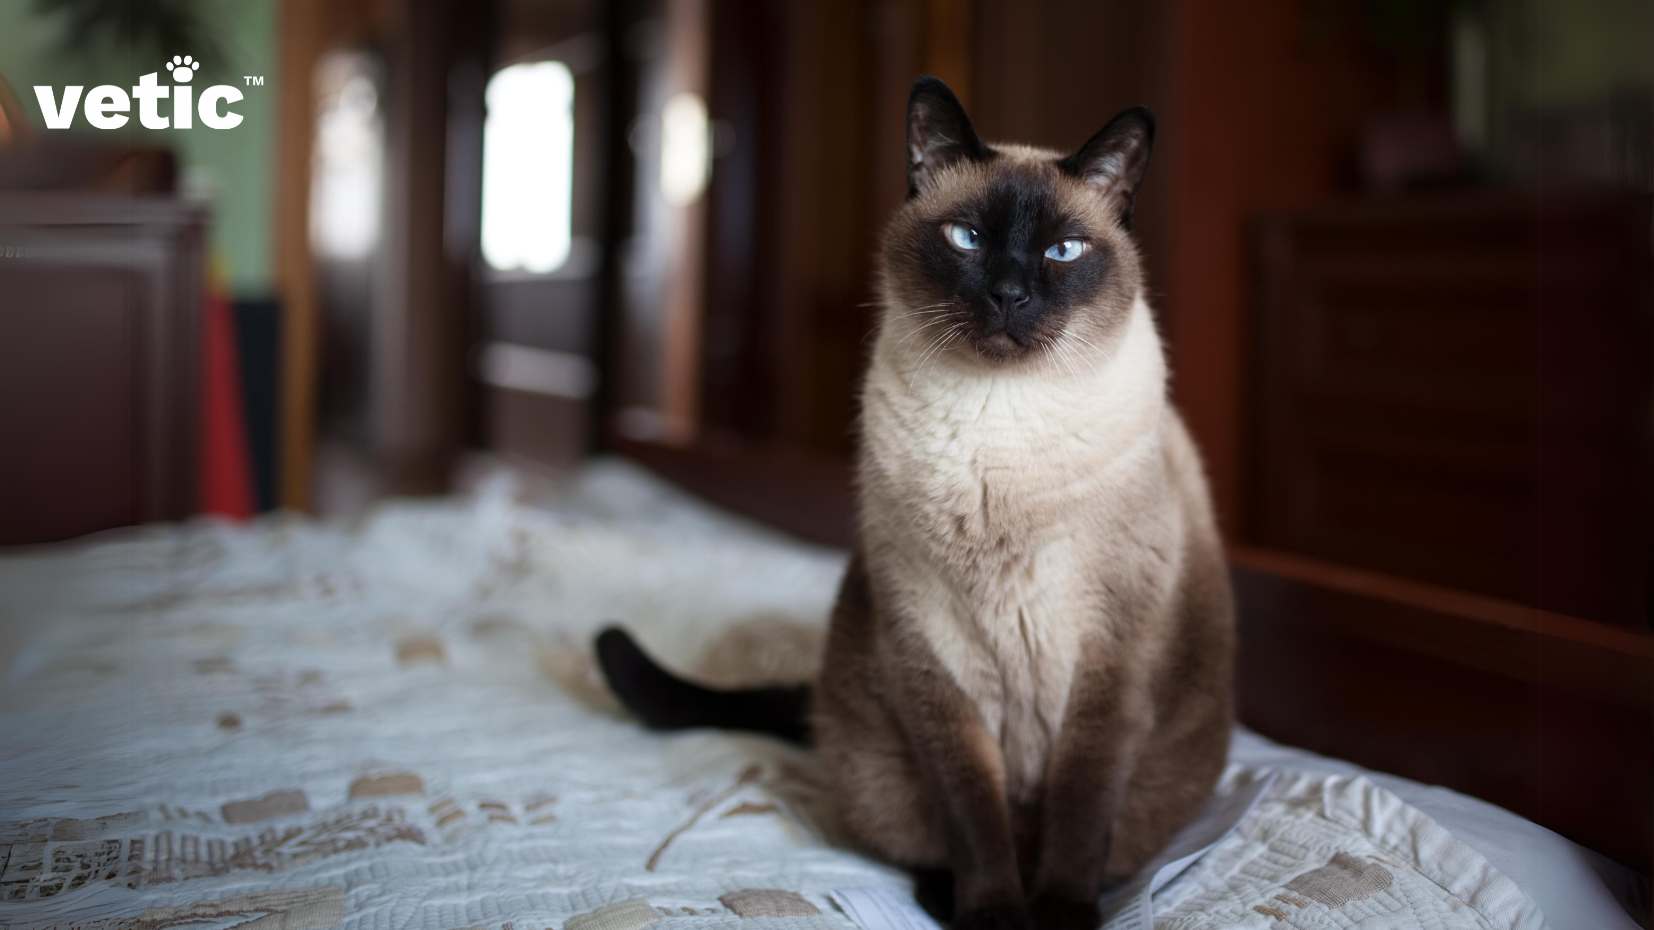 When adopting a Siamese Cat in India be sure to check their parents for health issues including cross eyes. Squints or cross-eyes are a common hereditary disorder among Siamese cats across the world